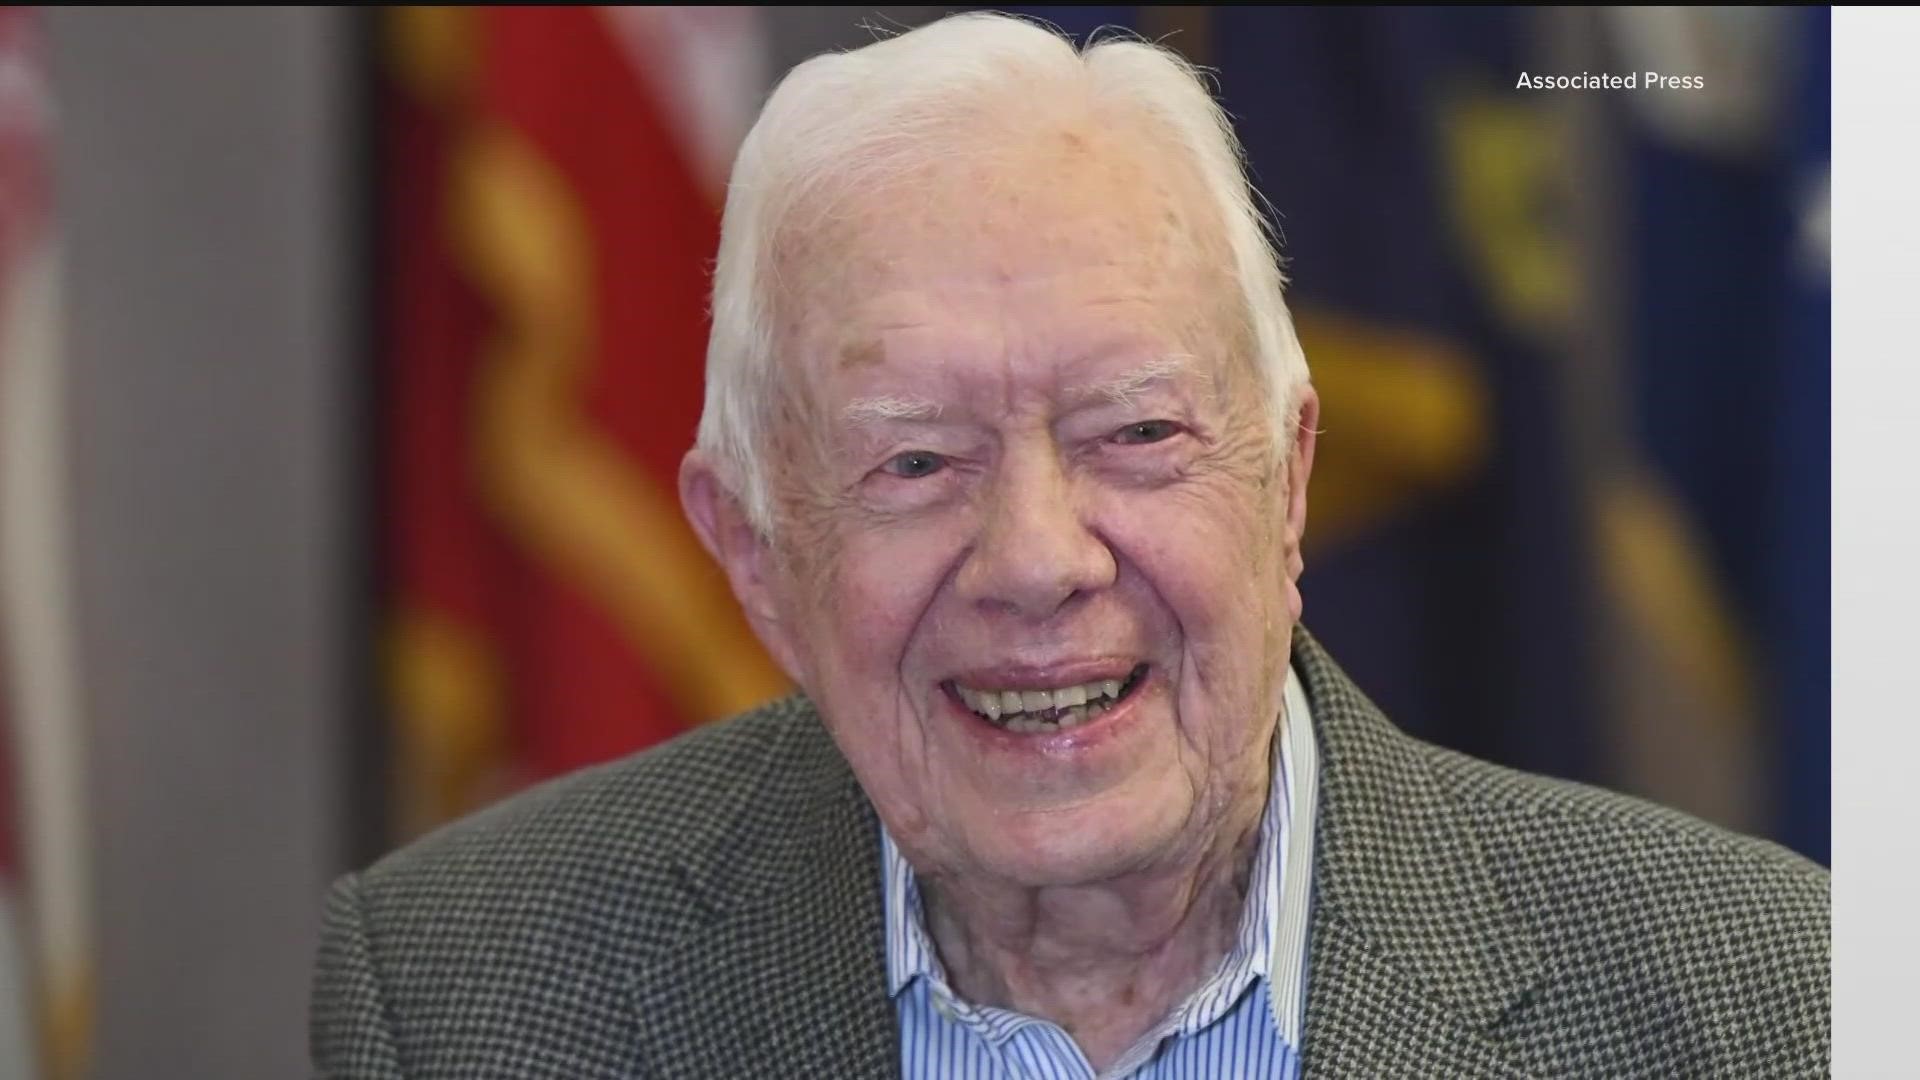 Jimmy Carter's grandson says the former president remains in good spirits three months after entering end-of-life care at home.